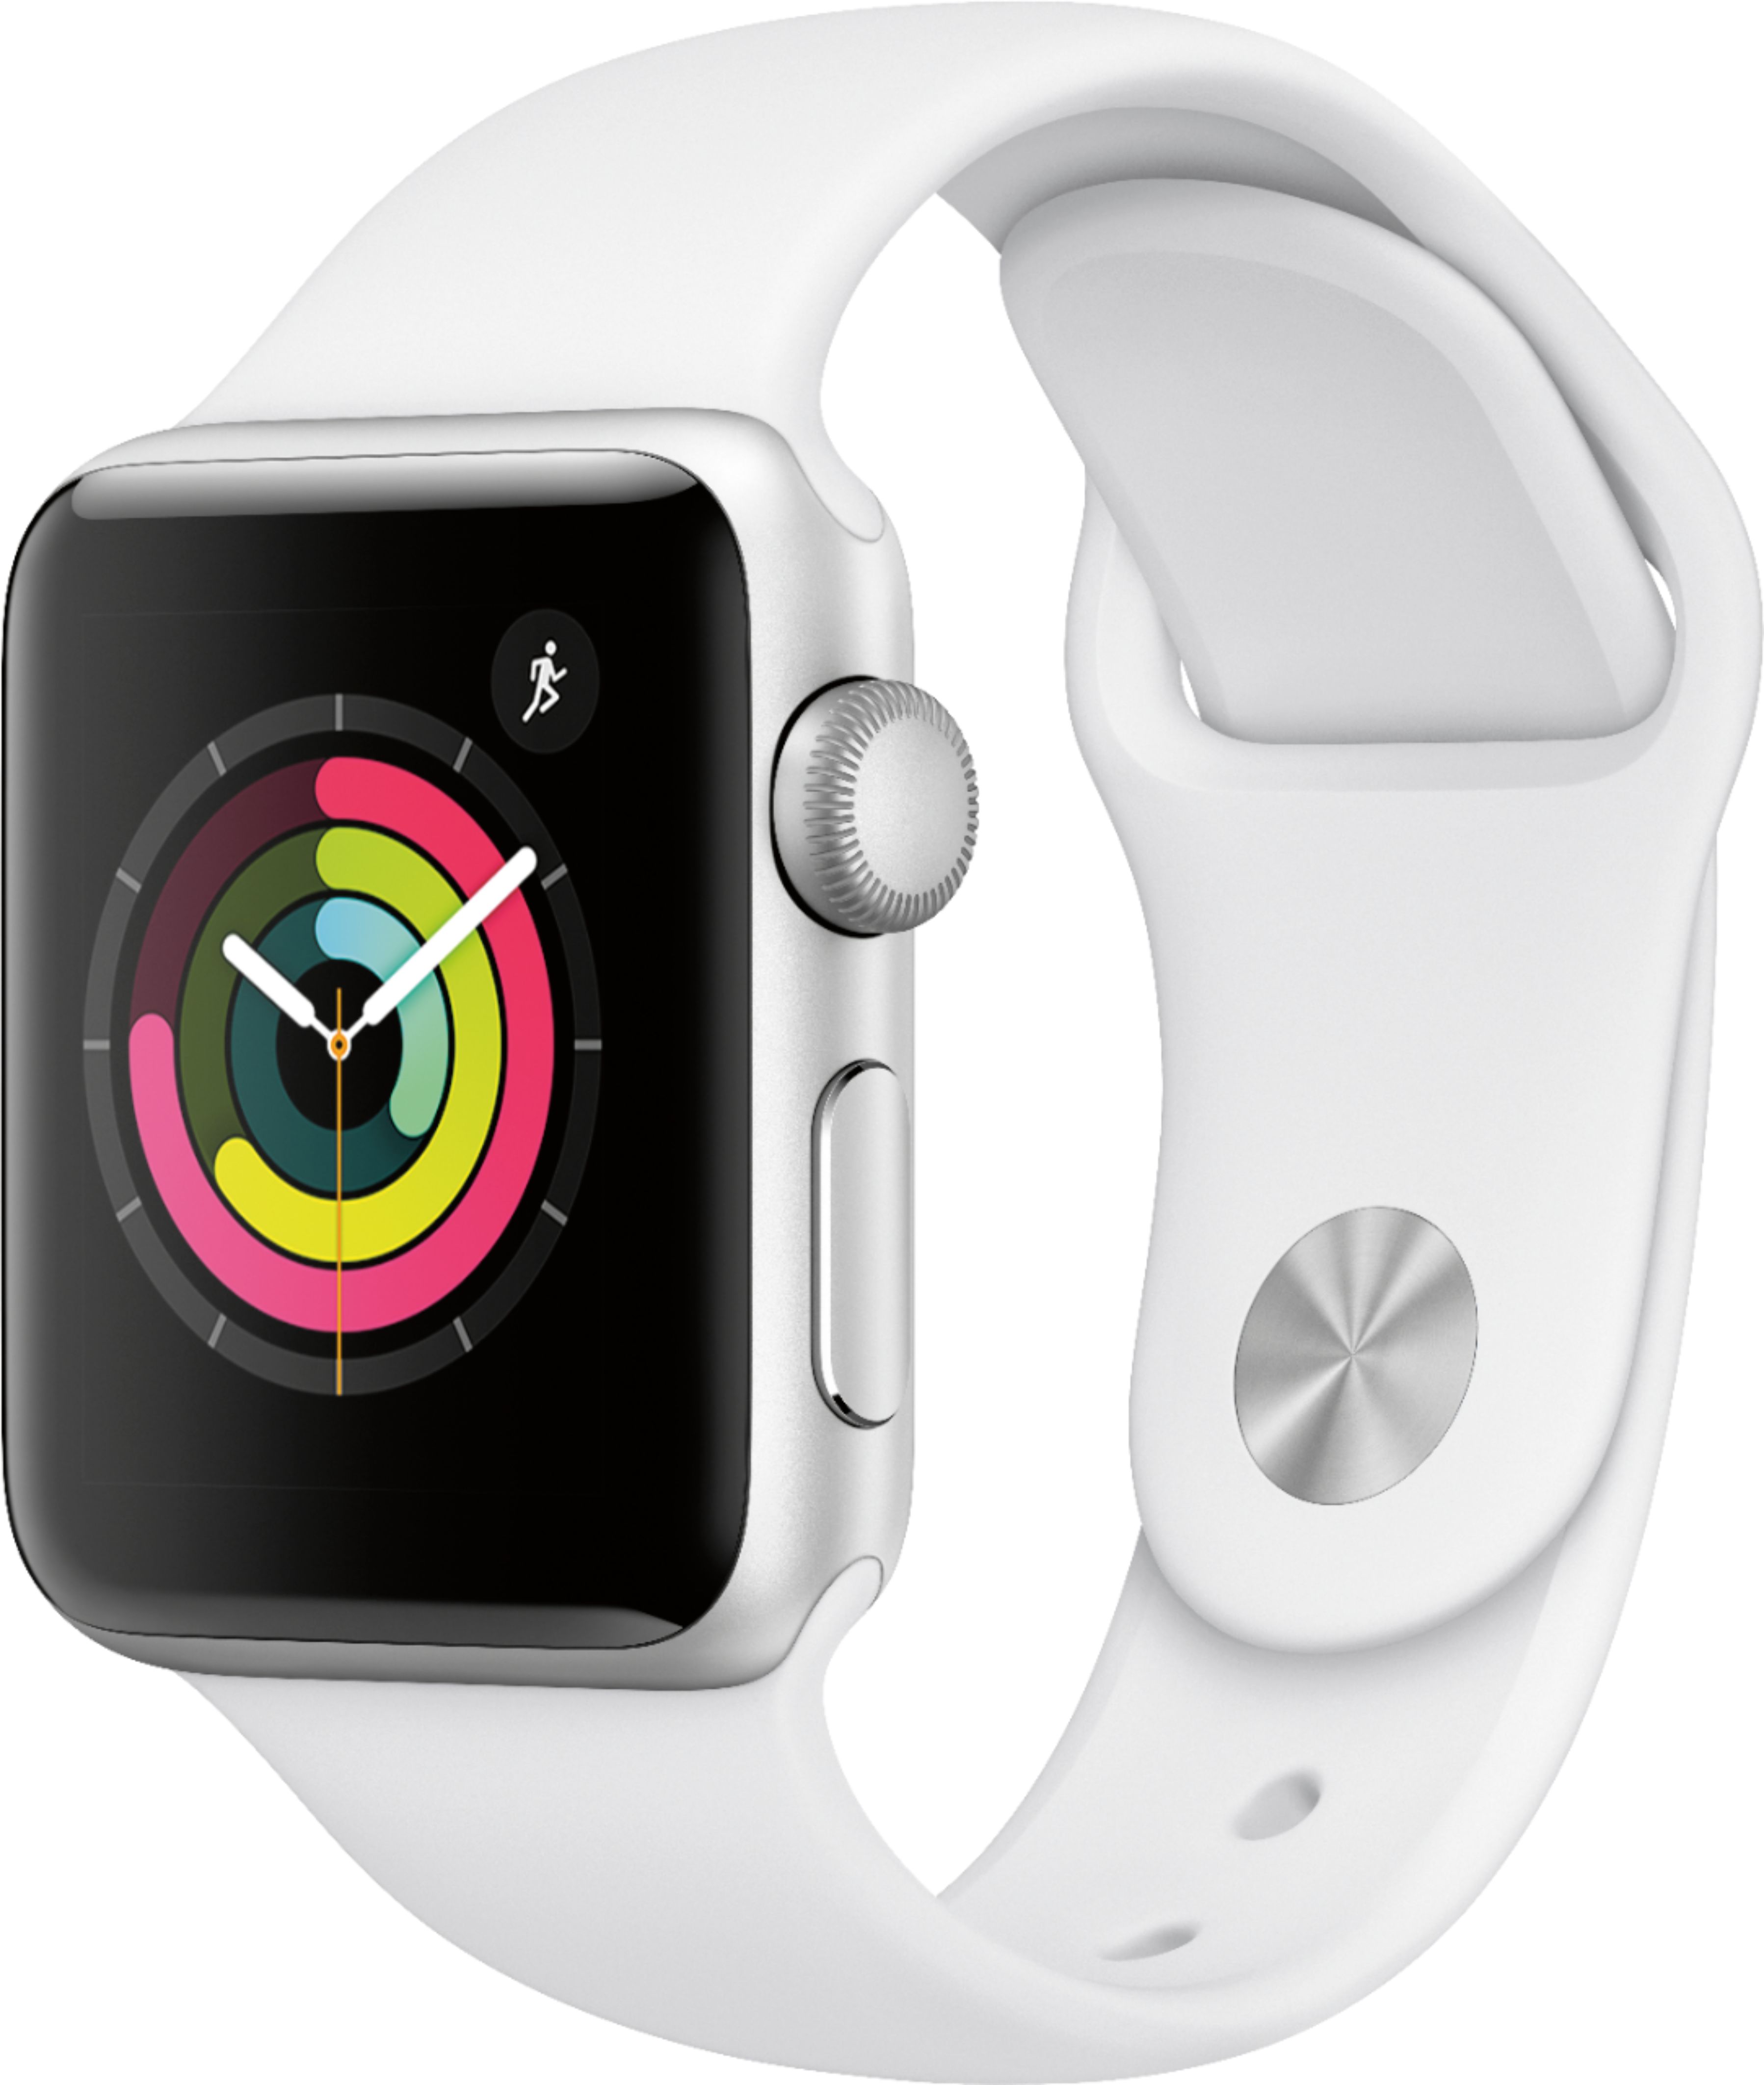 Apple Watch Series 3 Gps 38mm Silver Aluminum Case With White